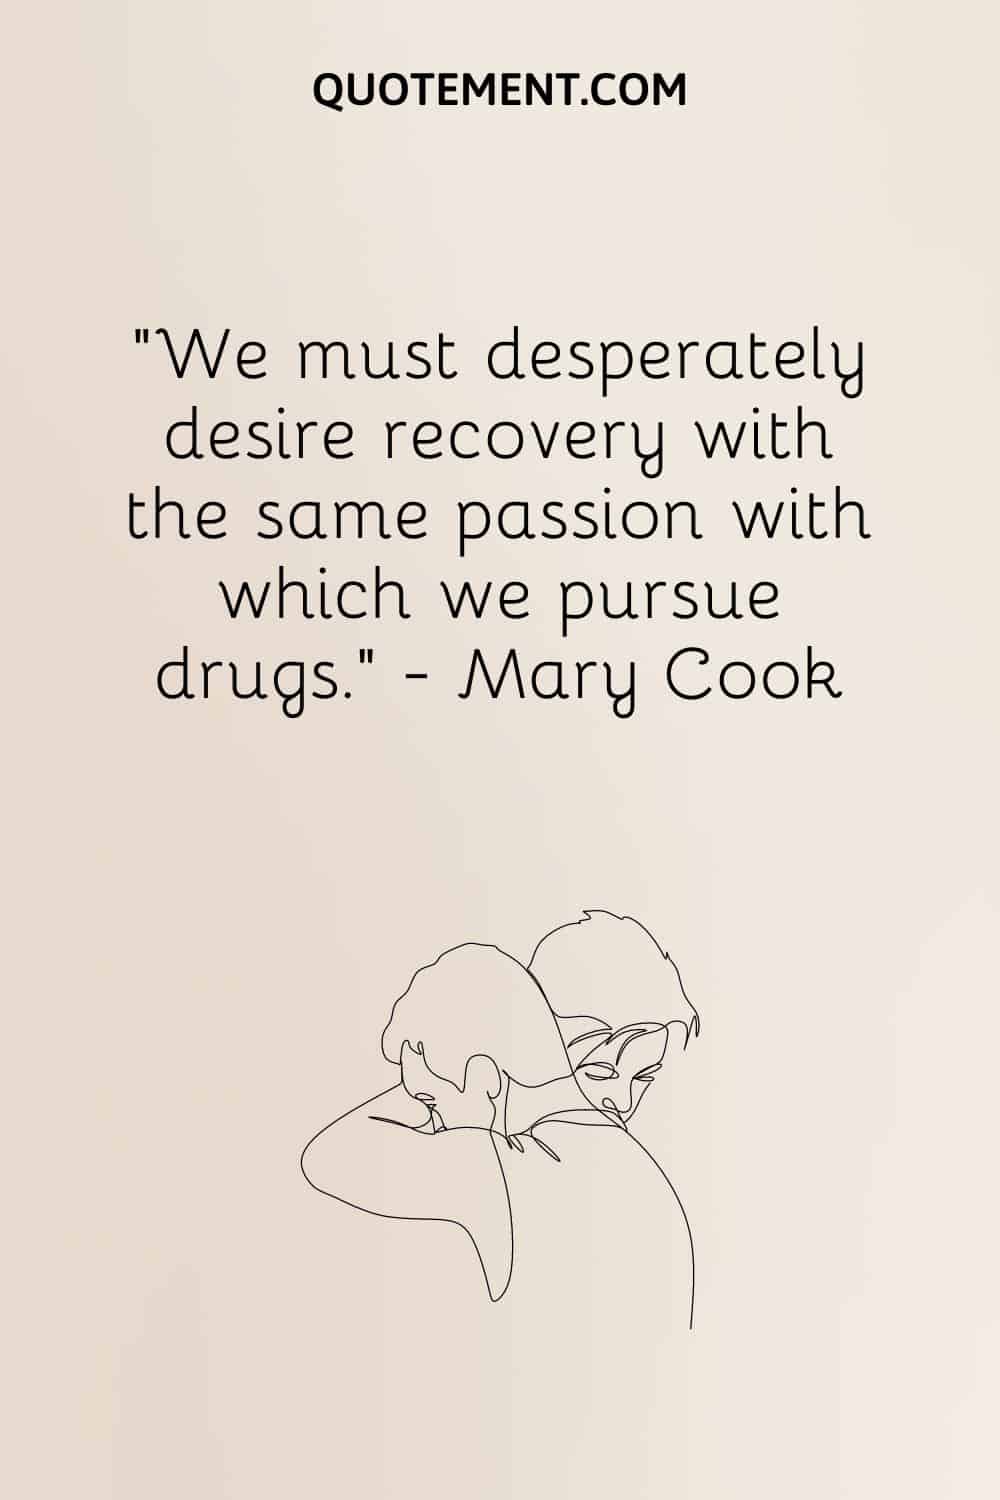 We must desperately desire recovery with the same passion with which we pursue drugs